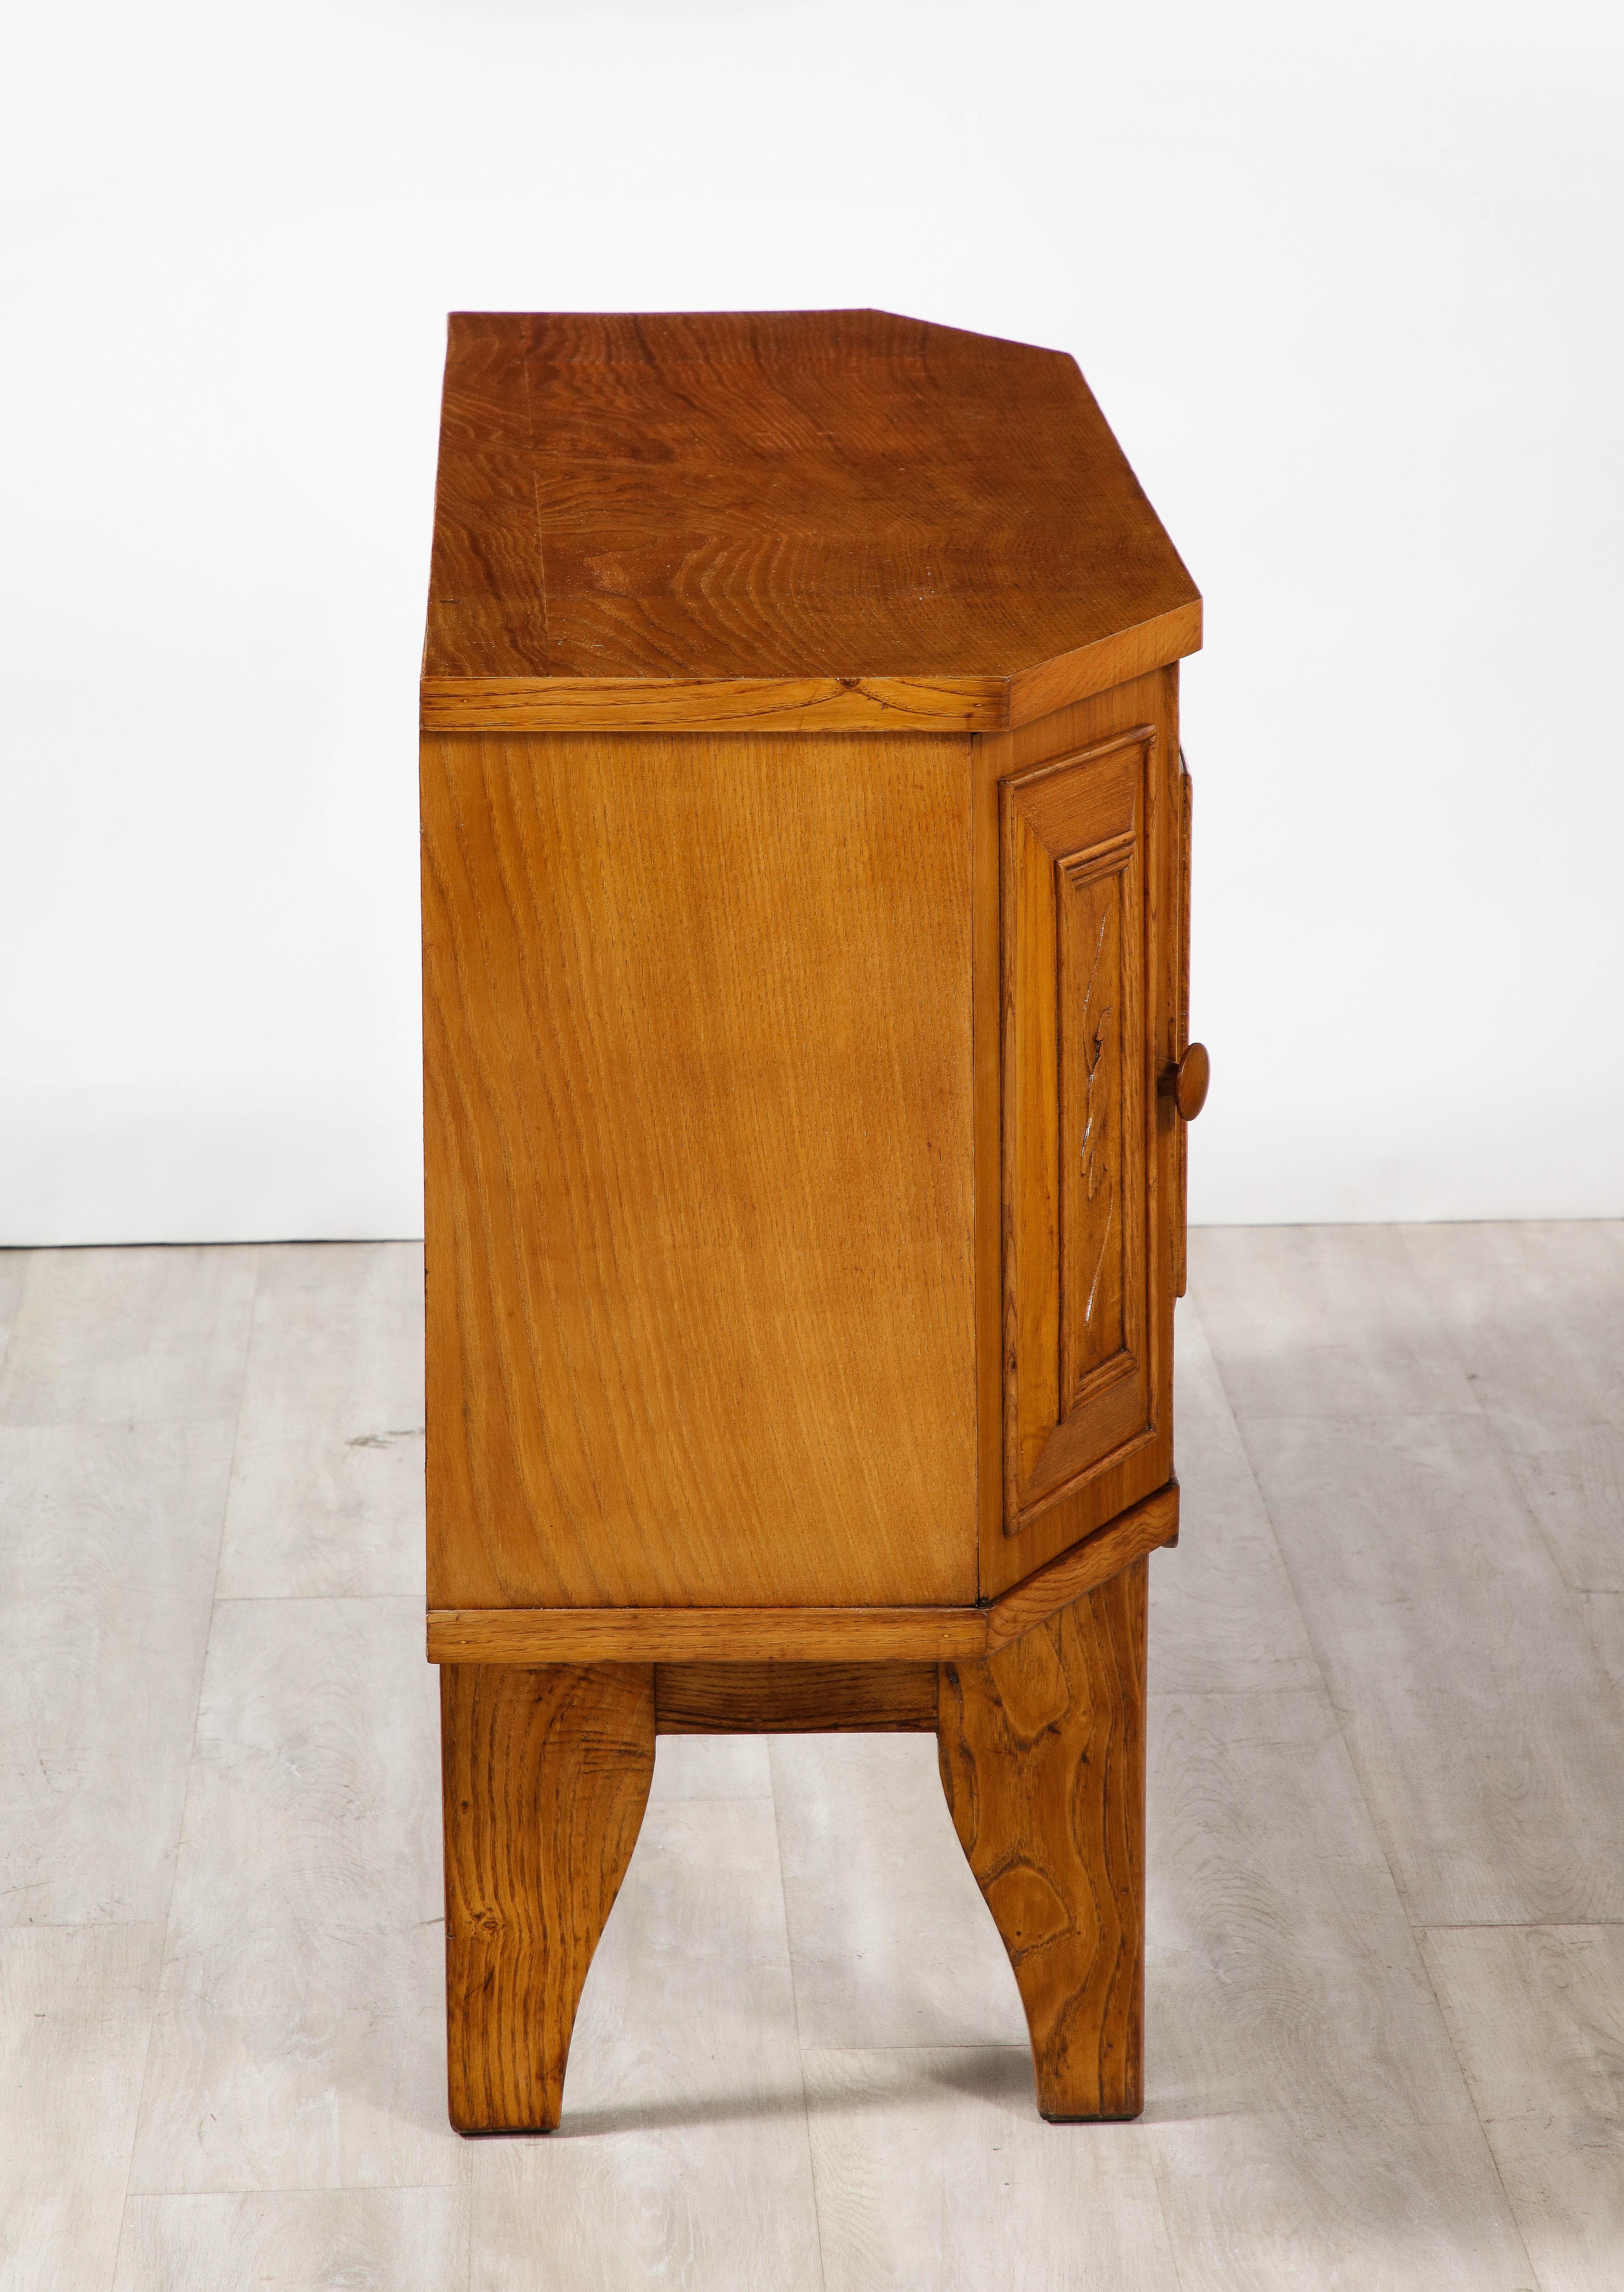 Italian Tuscan Art Deco Carved Oak Sideboard or Credenza, circa 1940 For Sale 5